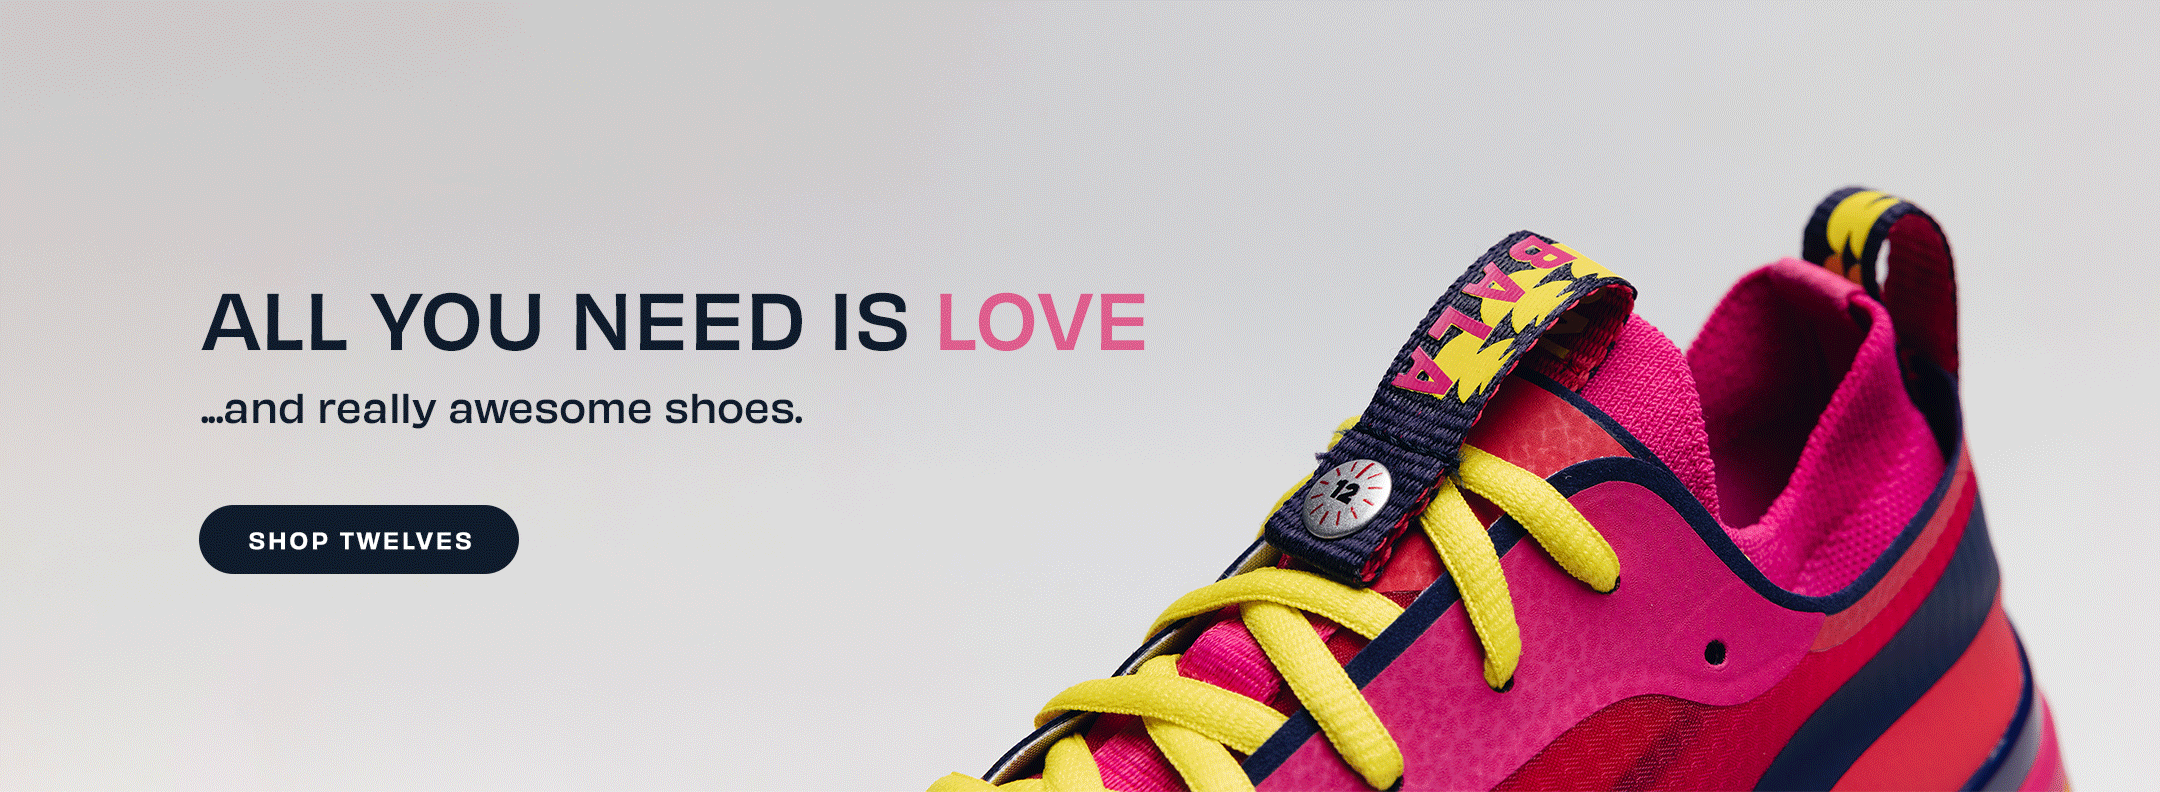 All you need is love... and really awesome shoes.